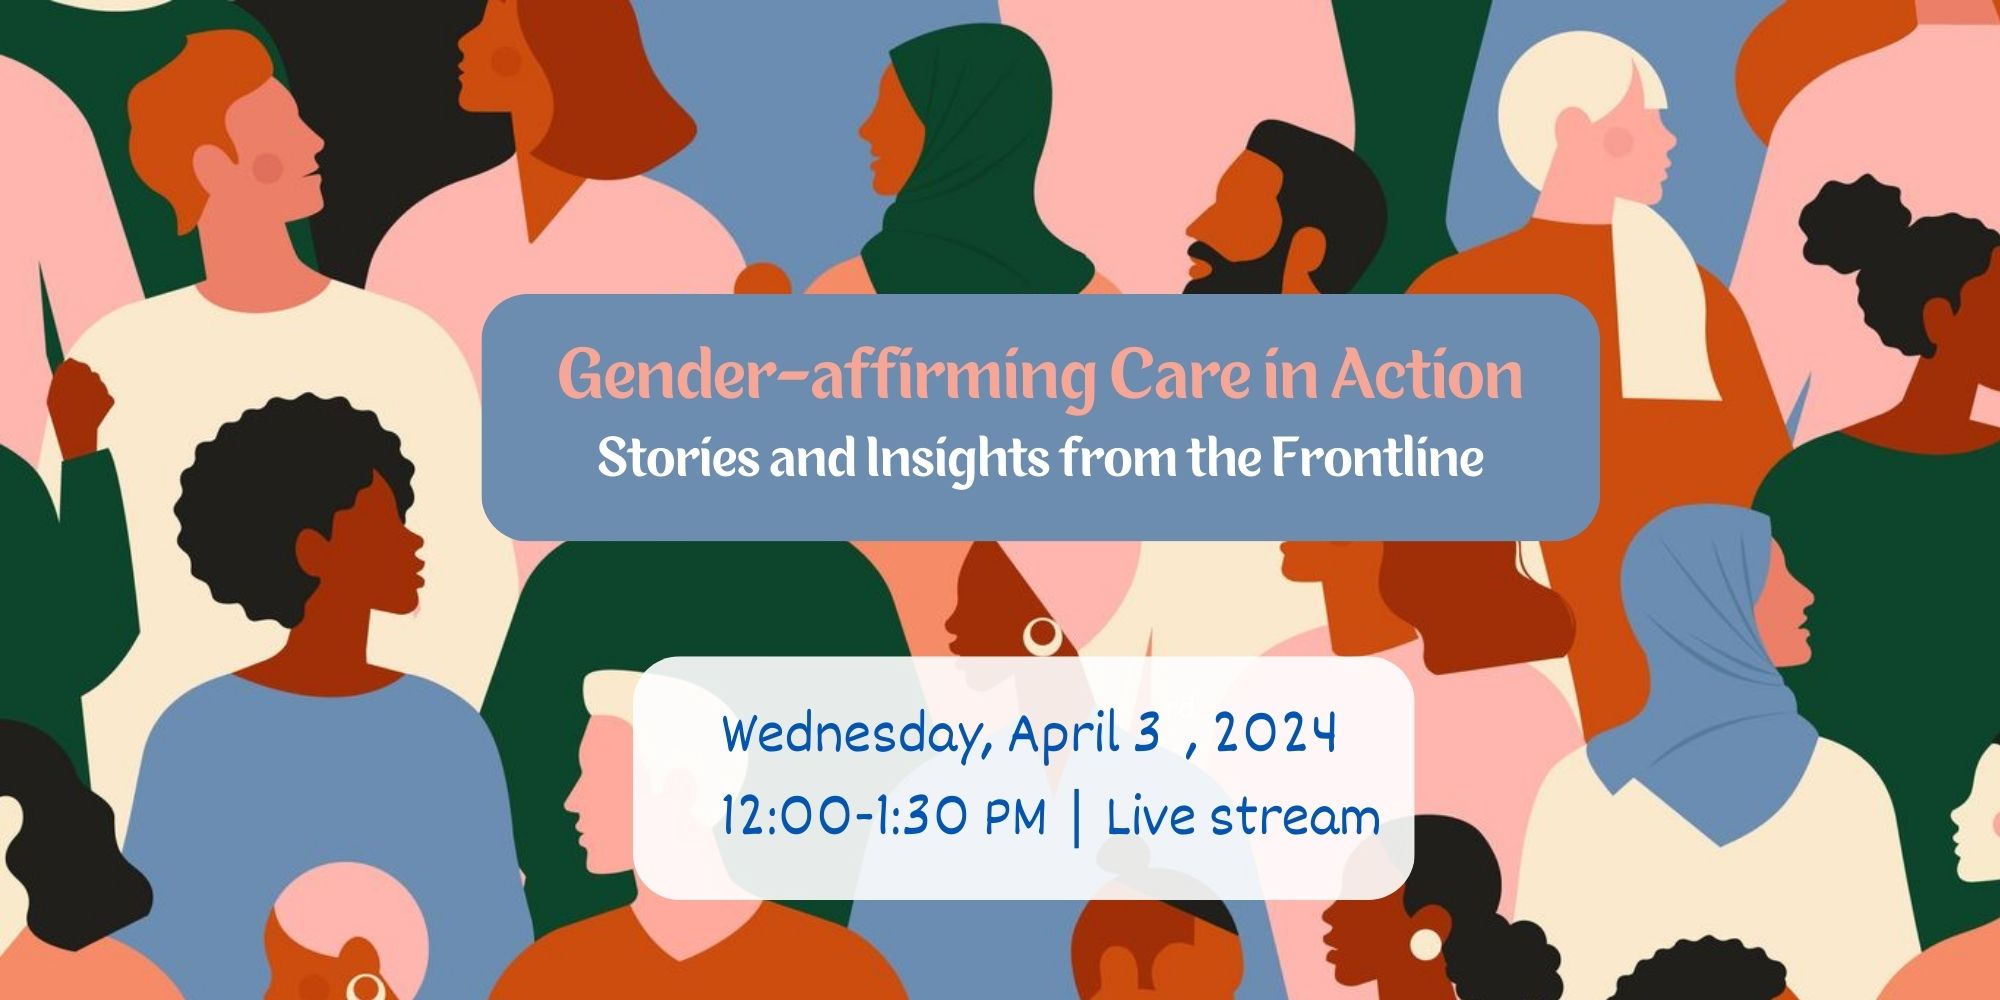 Gender-affirming Care in Action: Stories and Insights from the Frontline
